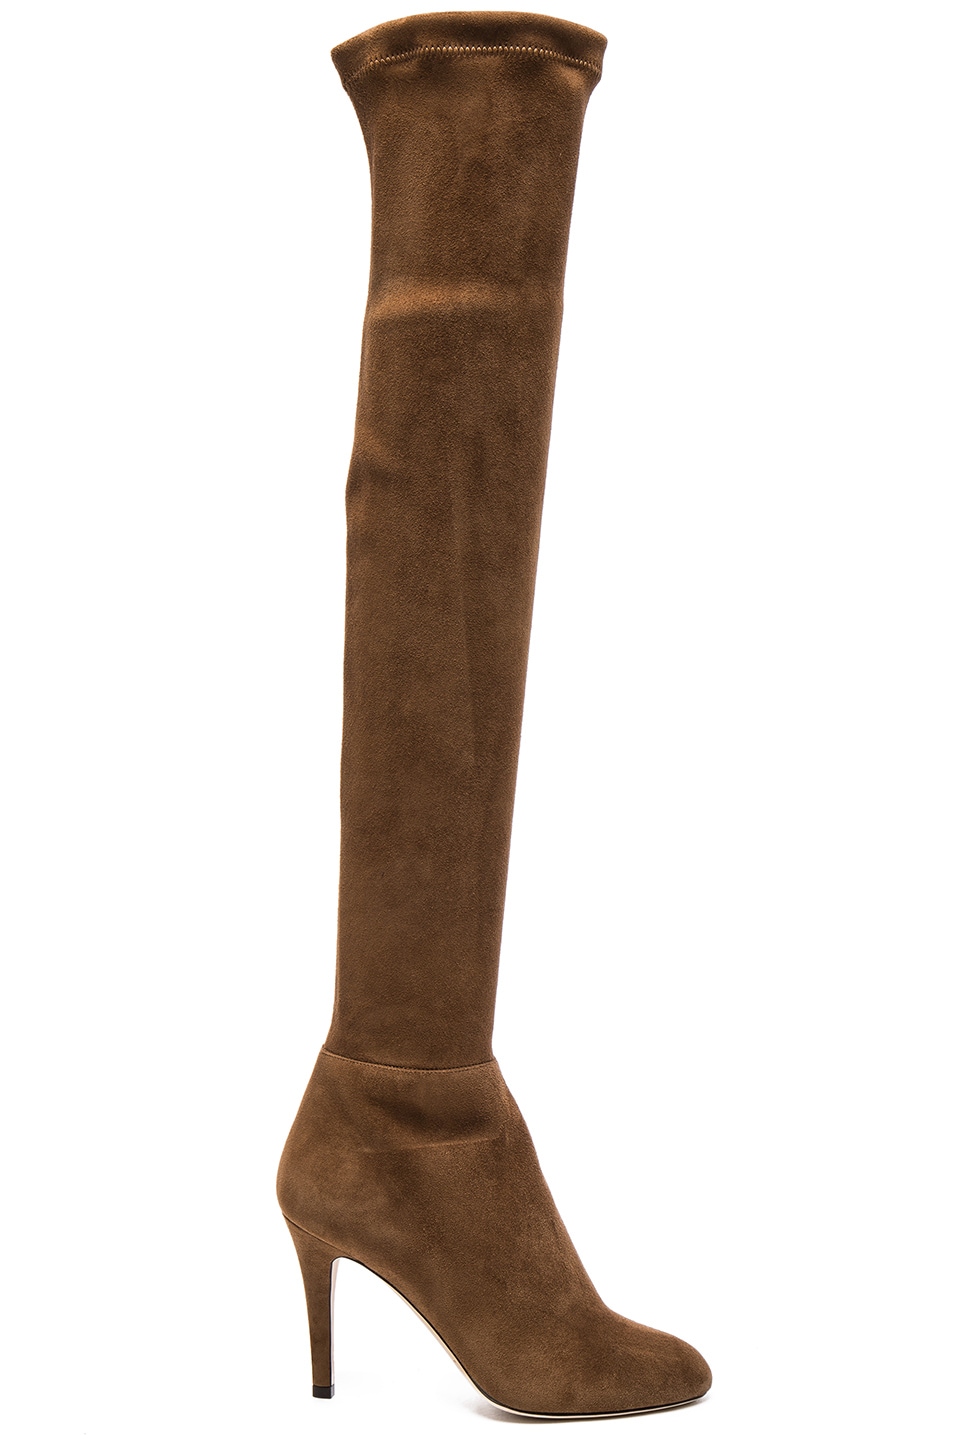 Image 1 of Jimmy Choo Suede Toni Boots in Khaki Brown